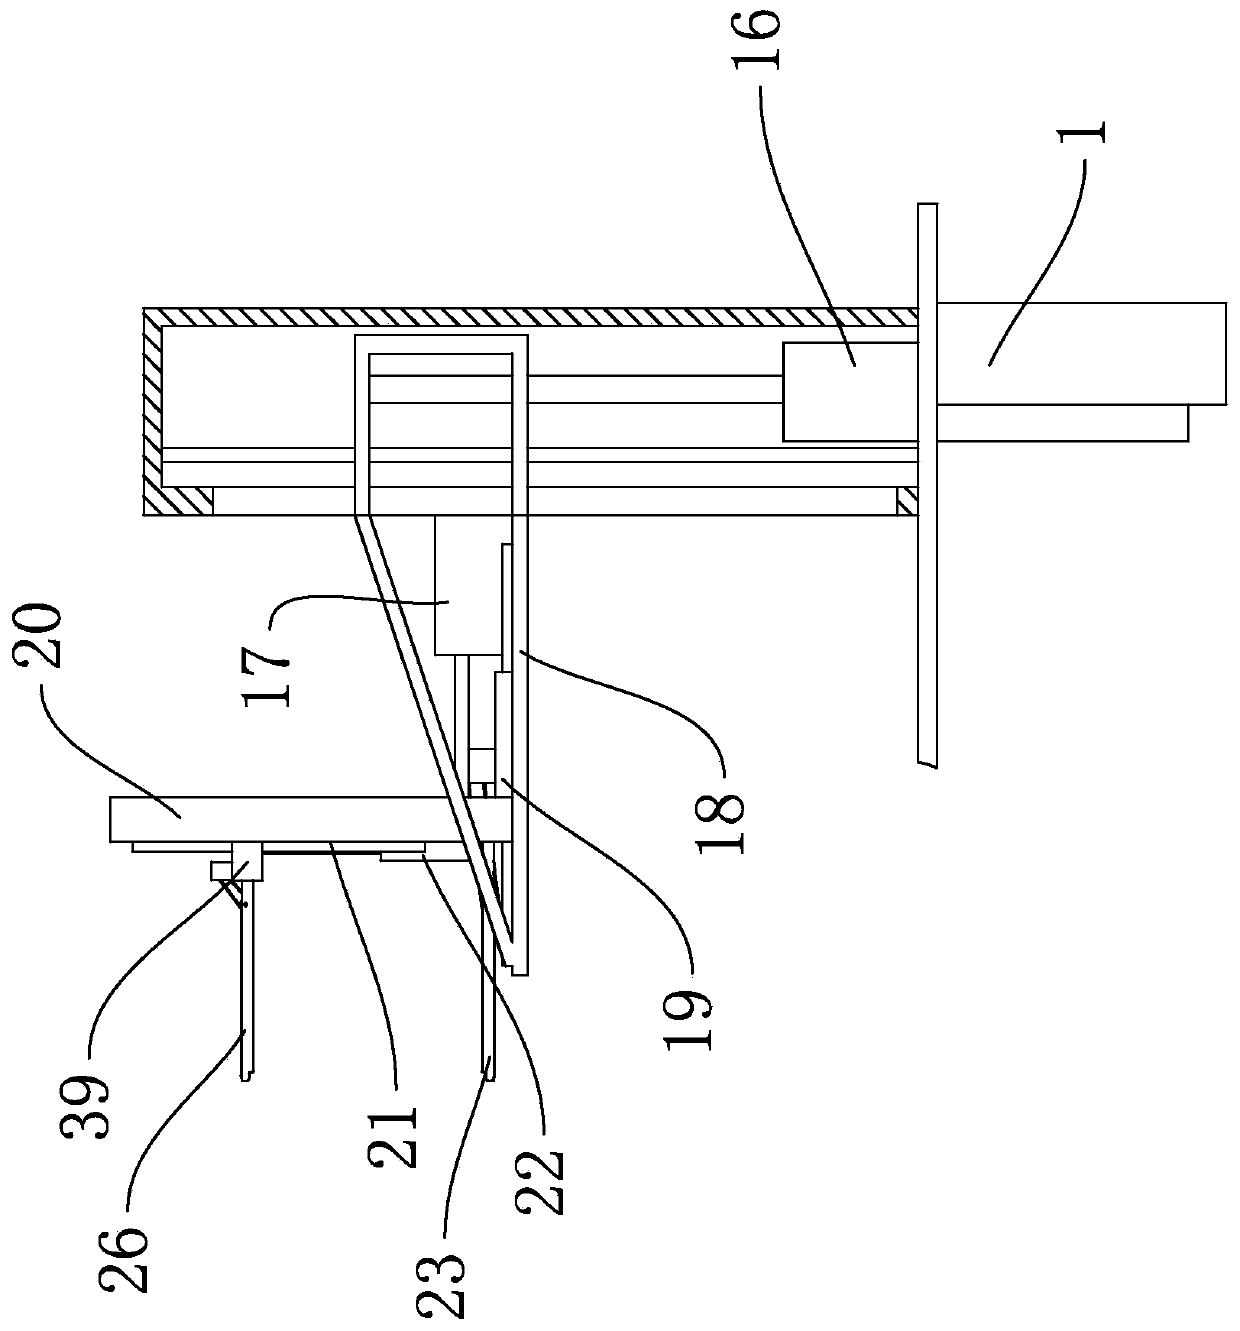 Omni-directional film coating device for carton